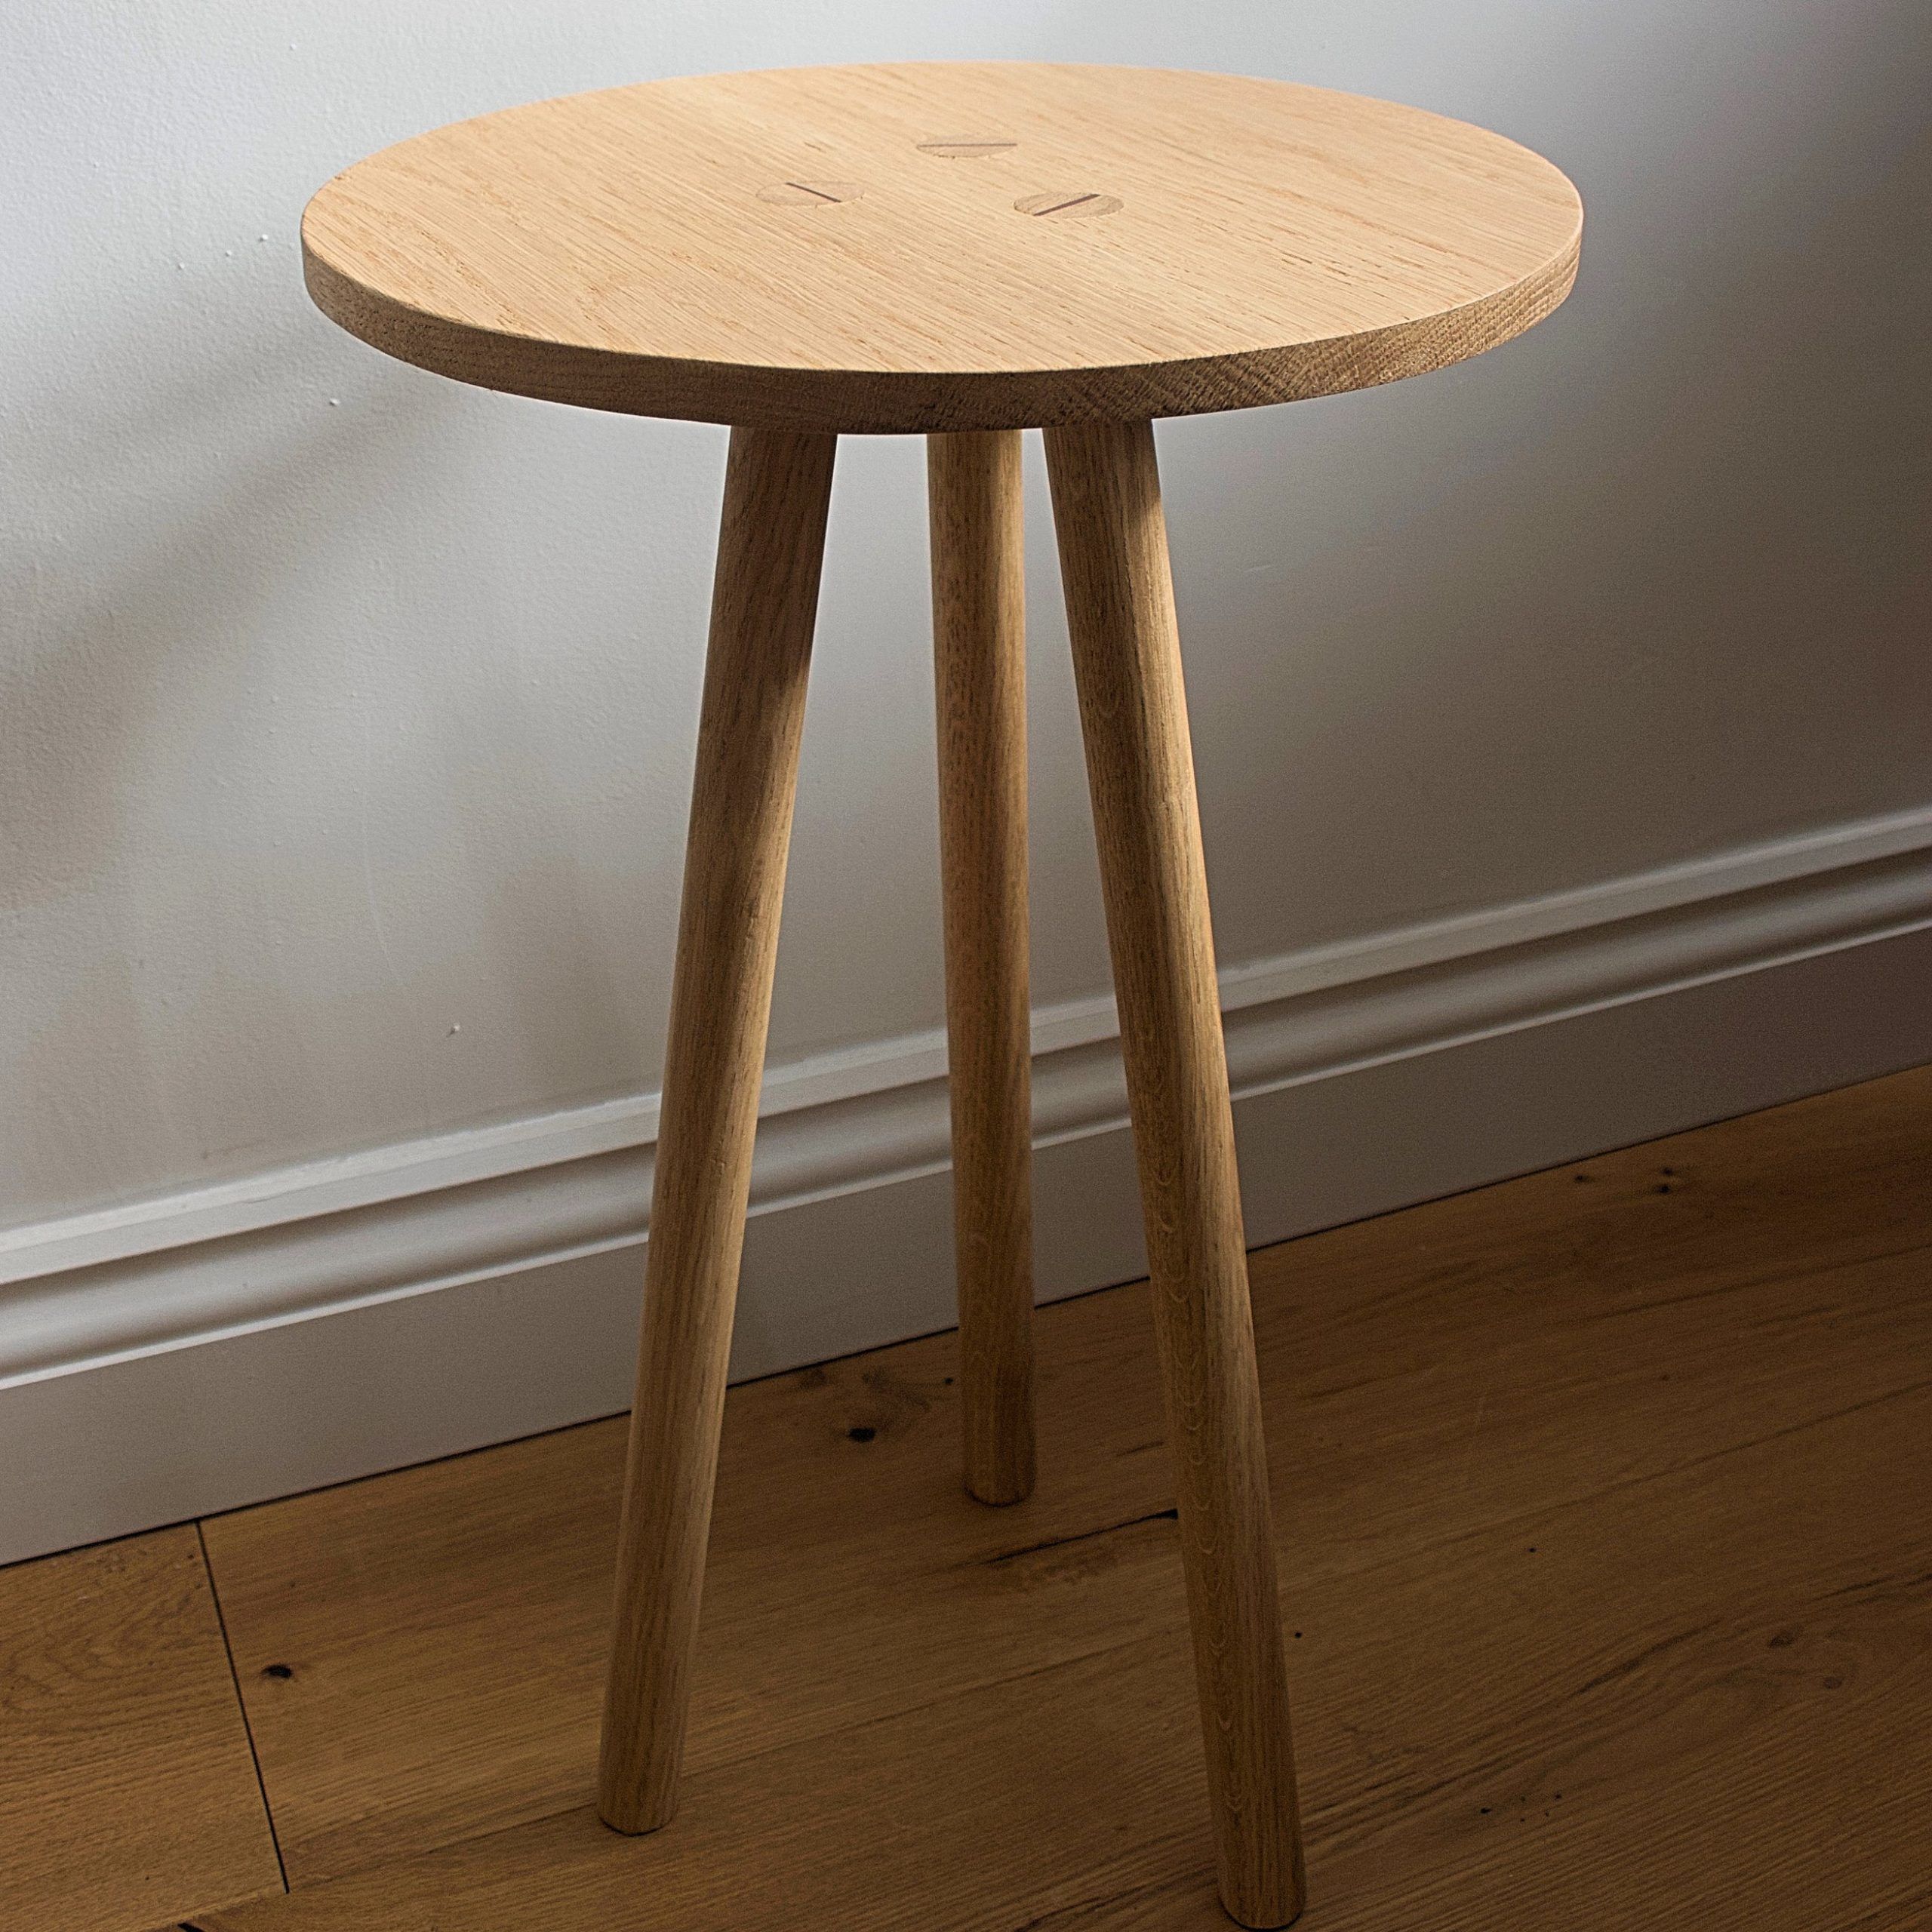 Three Legged Table Online, 43% Off | Www.angloamericancentre (View 1 of 20)